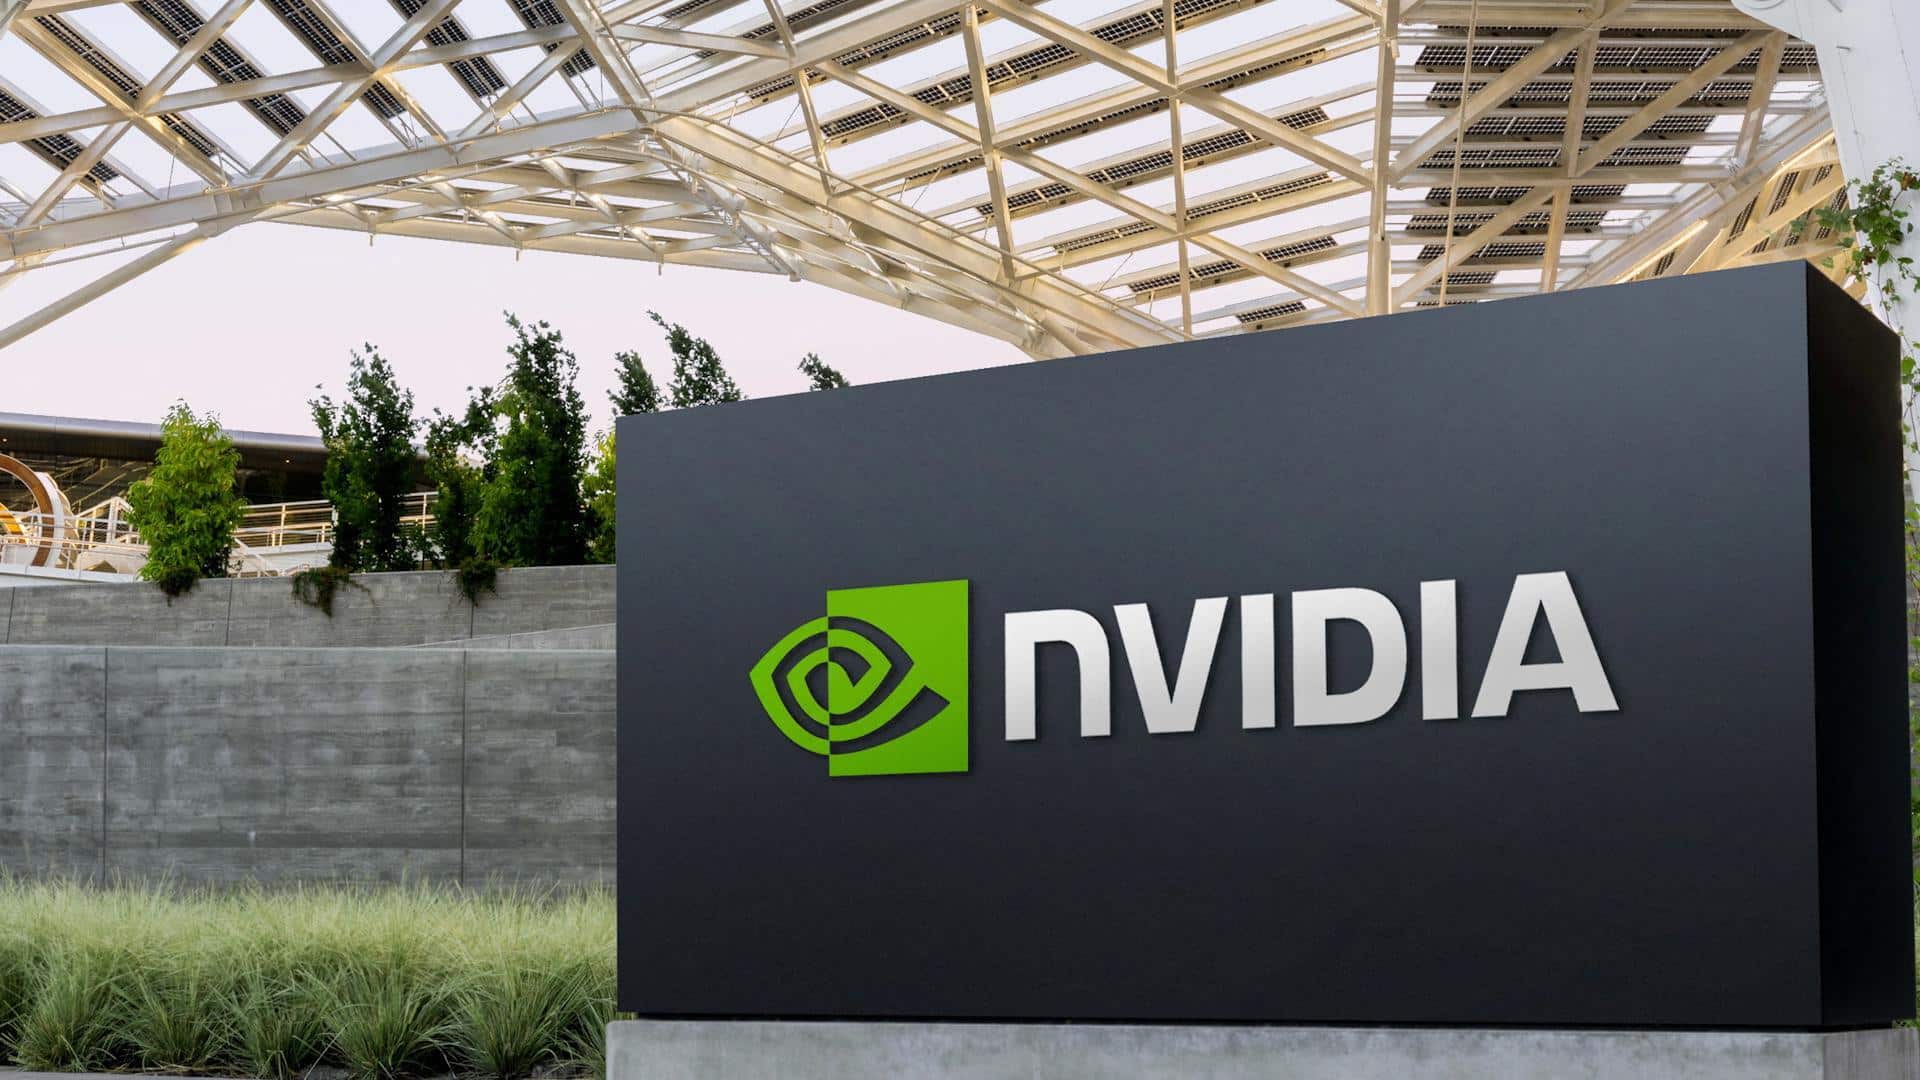 Google, Intel, Qualcomm join forces to counter NVIDIA's AI supremacy